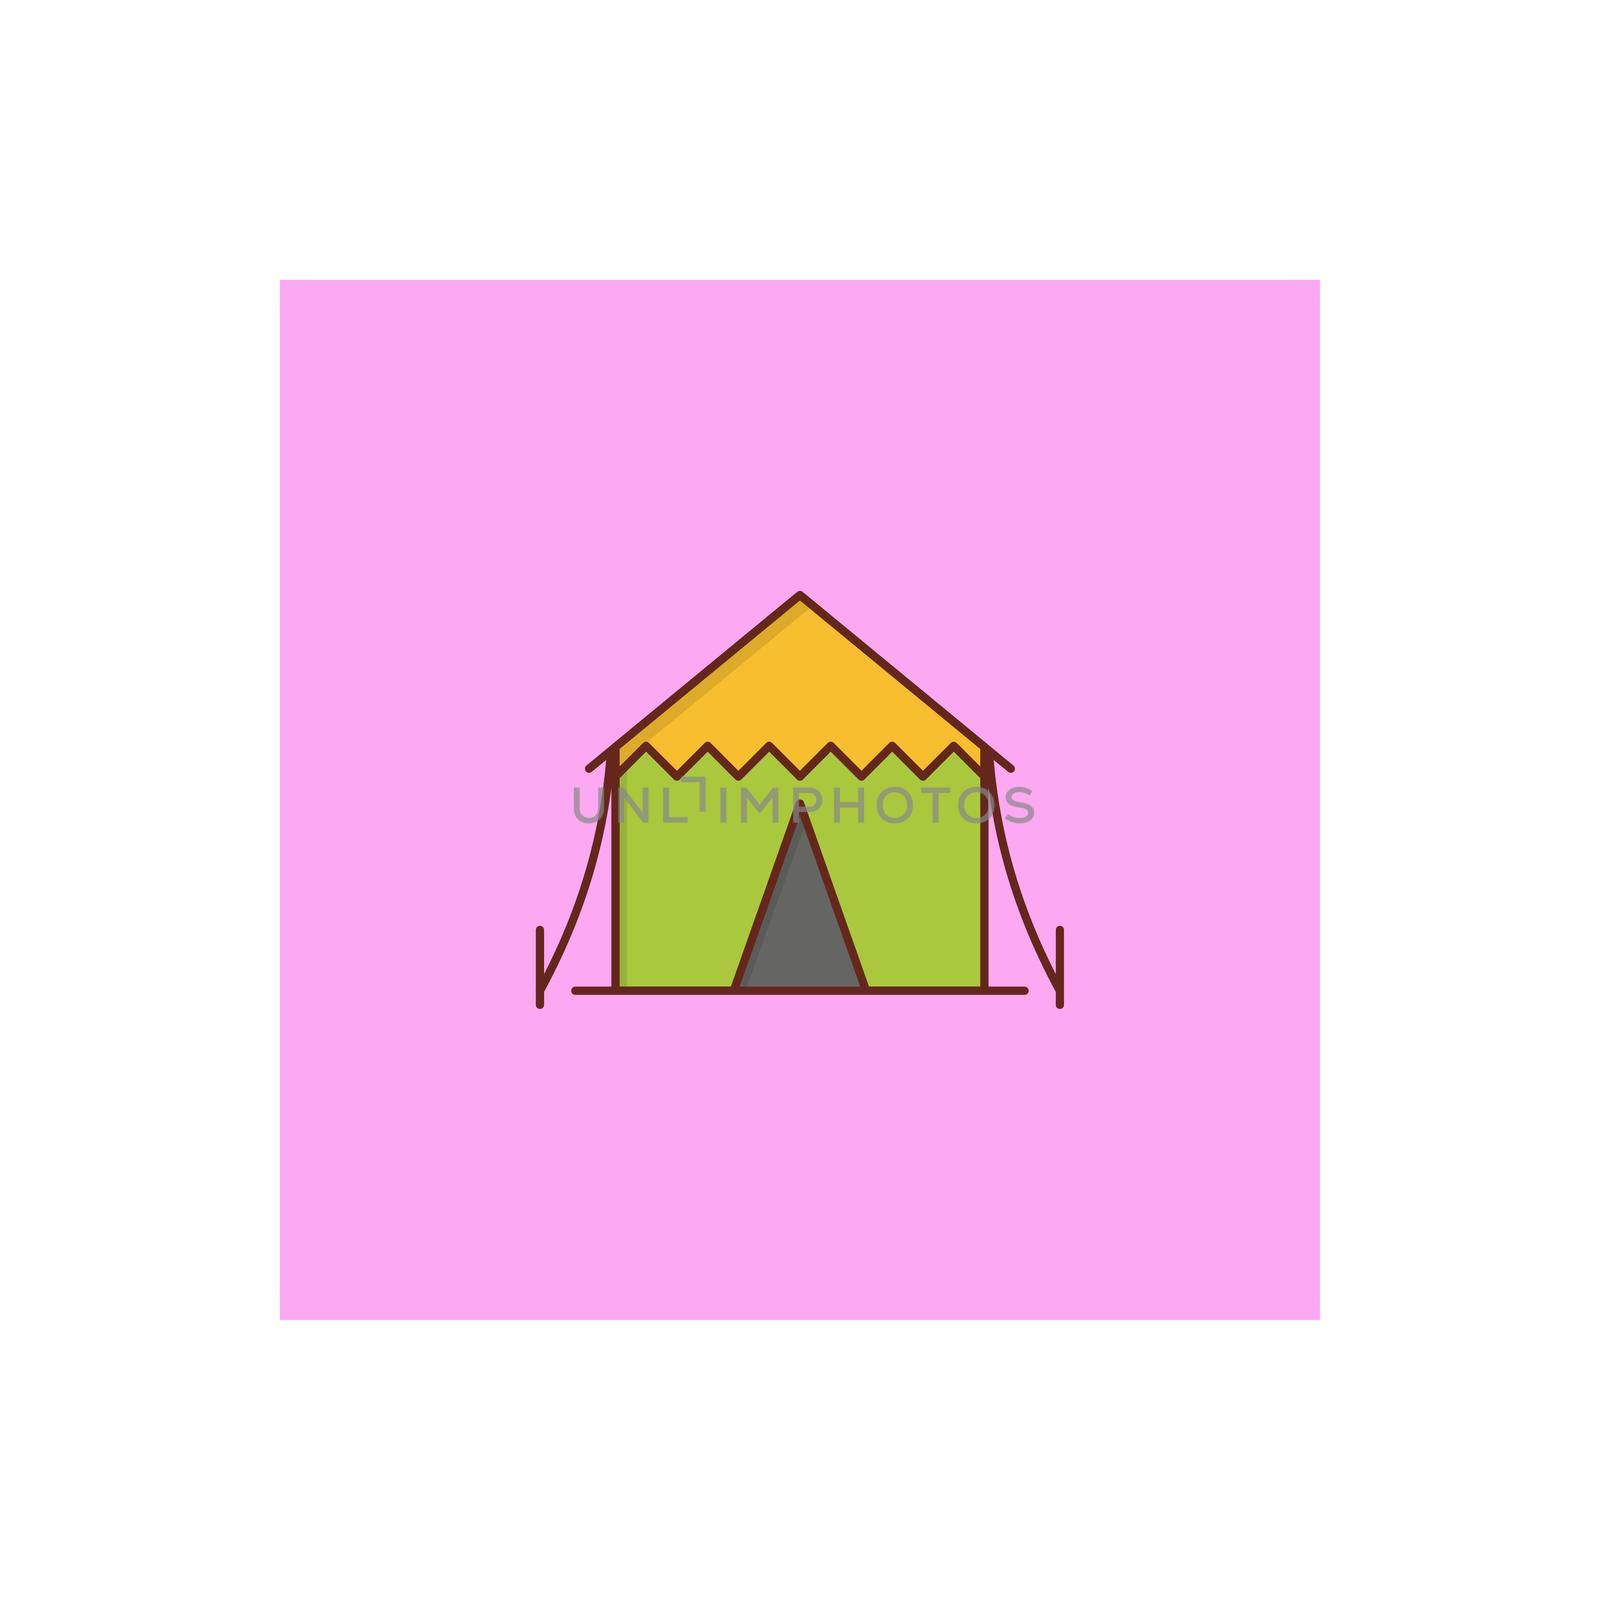 camp vector flat color icon